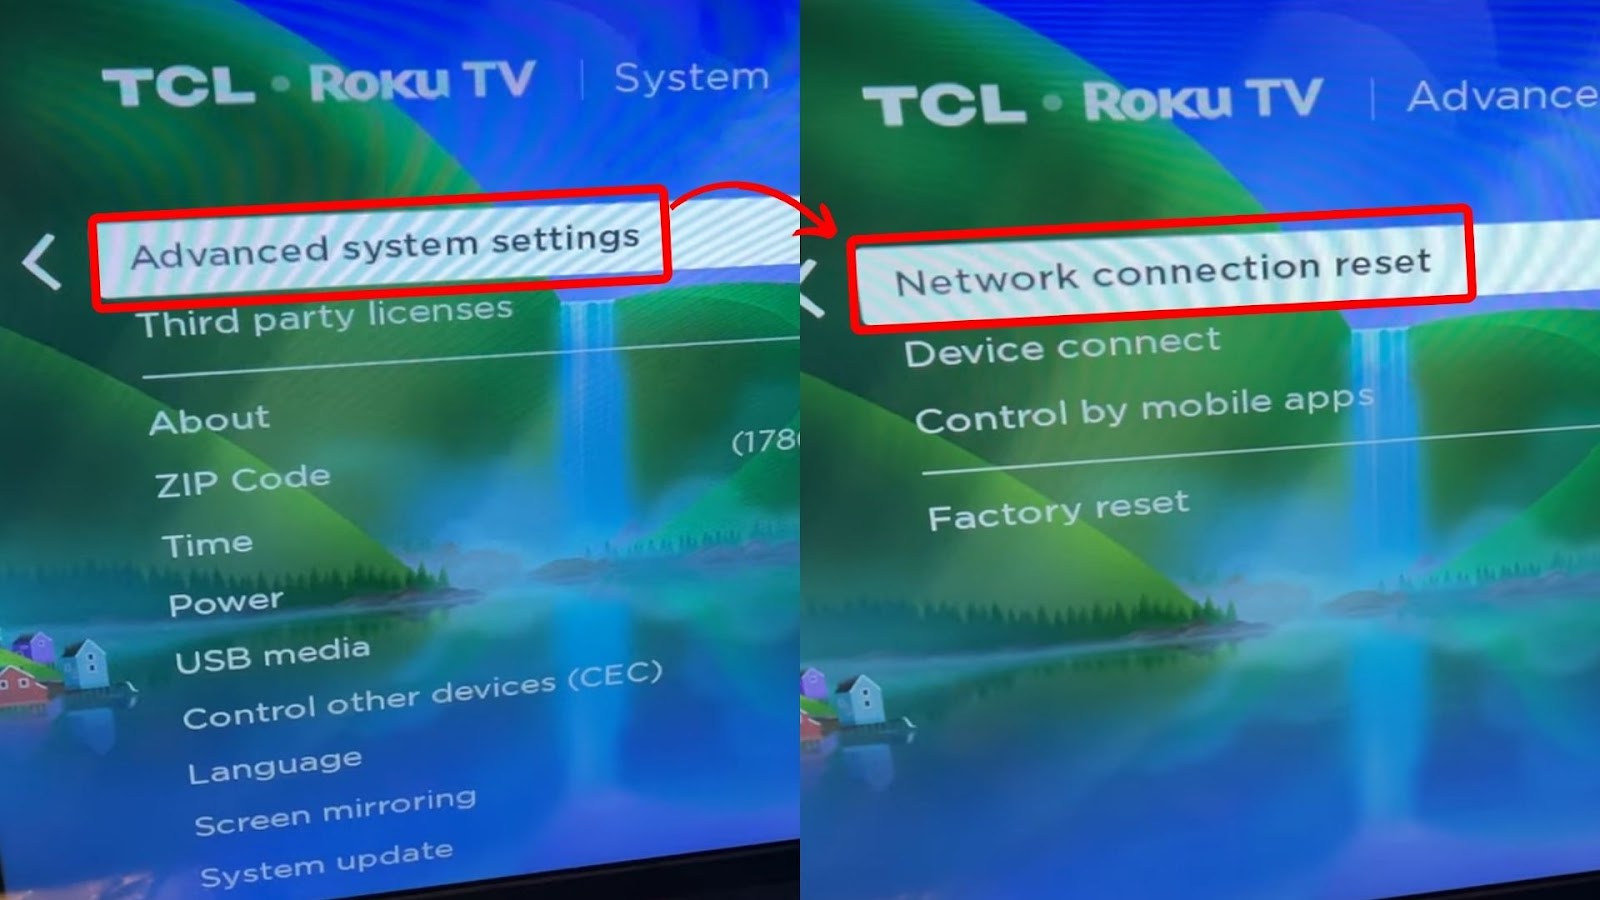 How to Reset Network Connection on TCL Roku TV